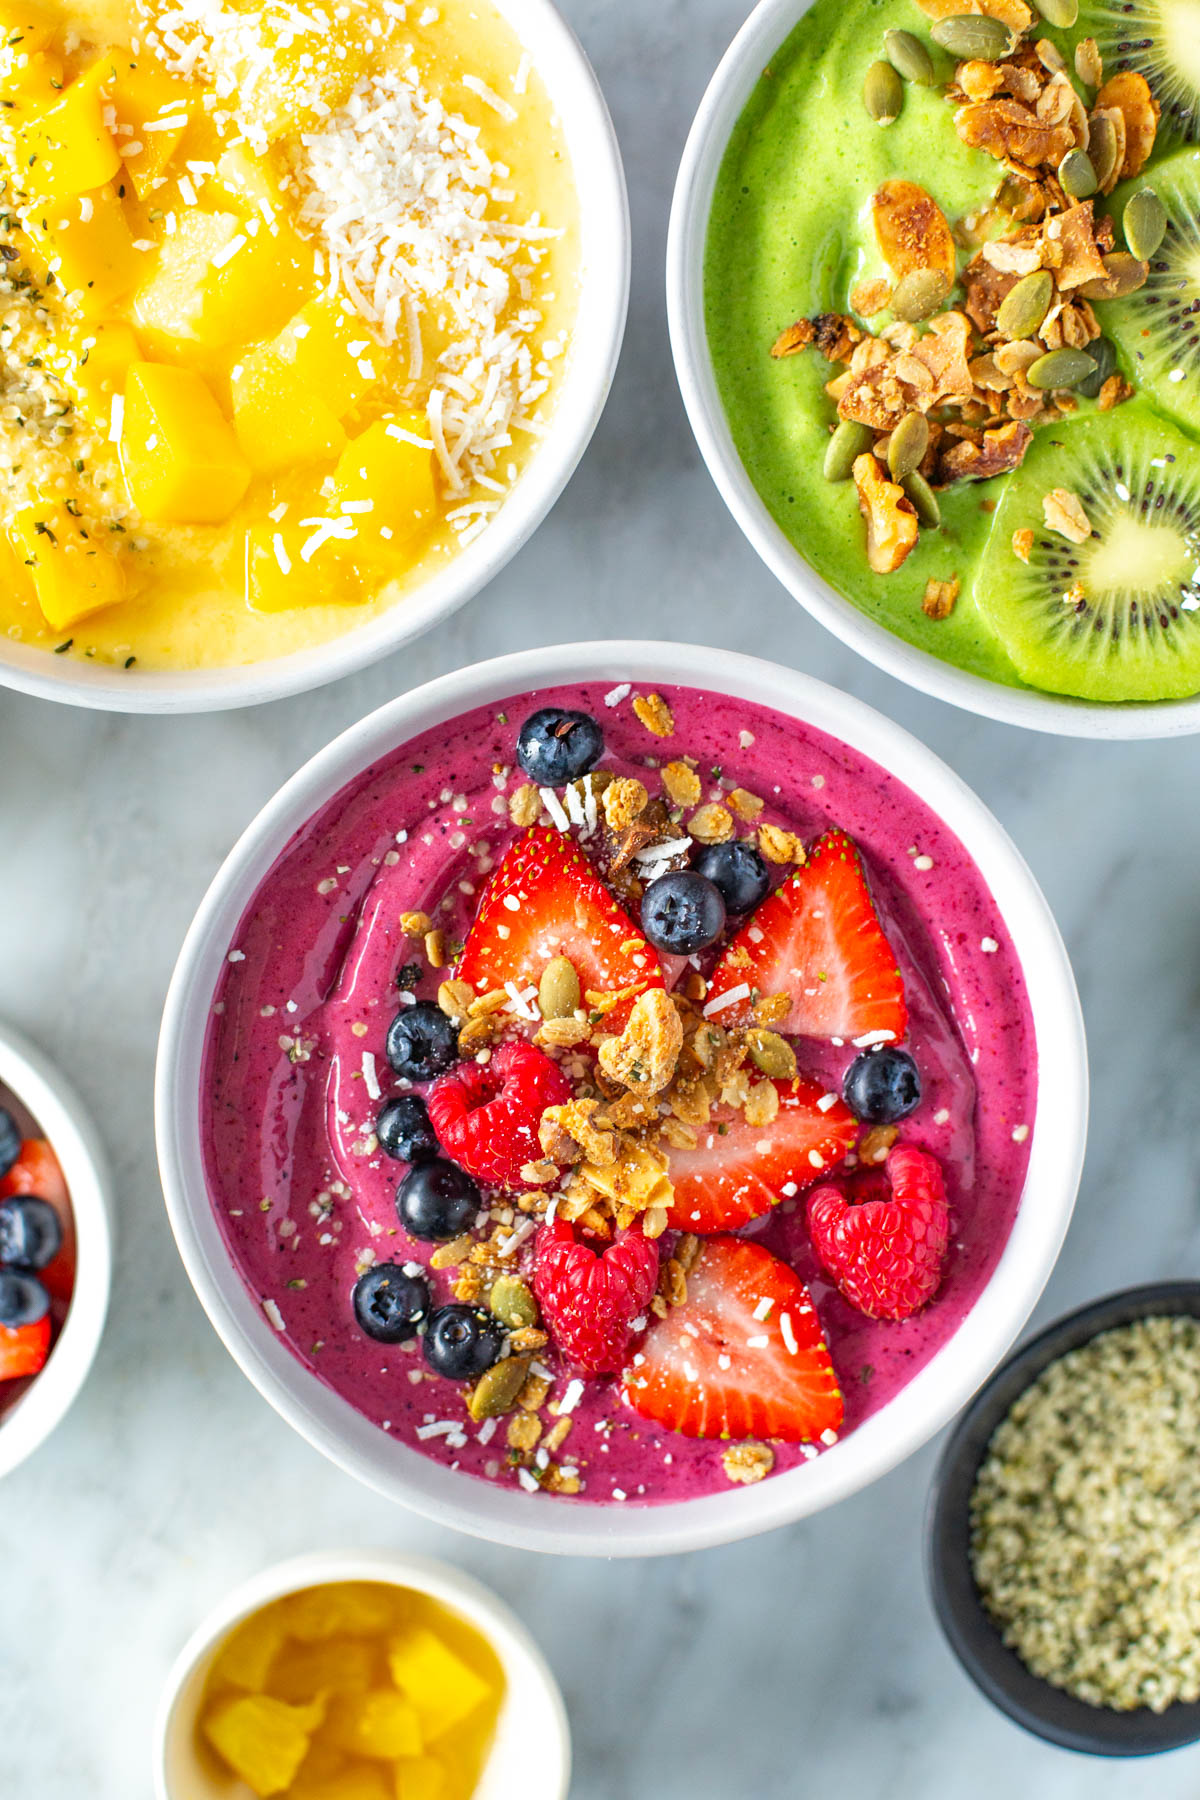 Three smoothie bowls with various toppings.